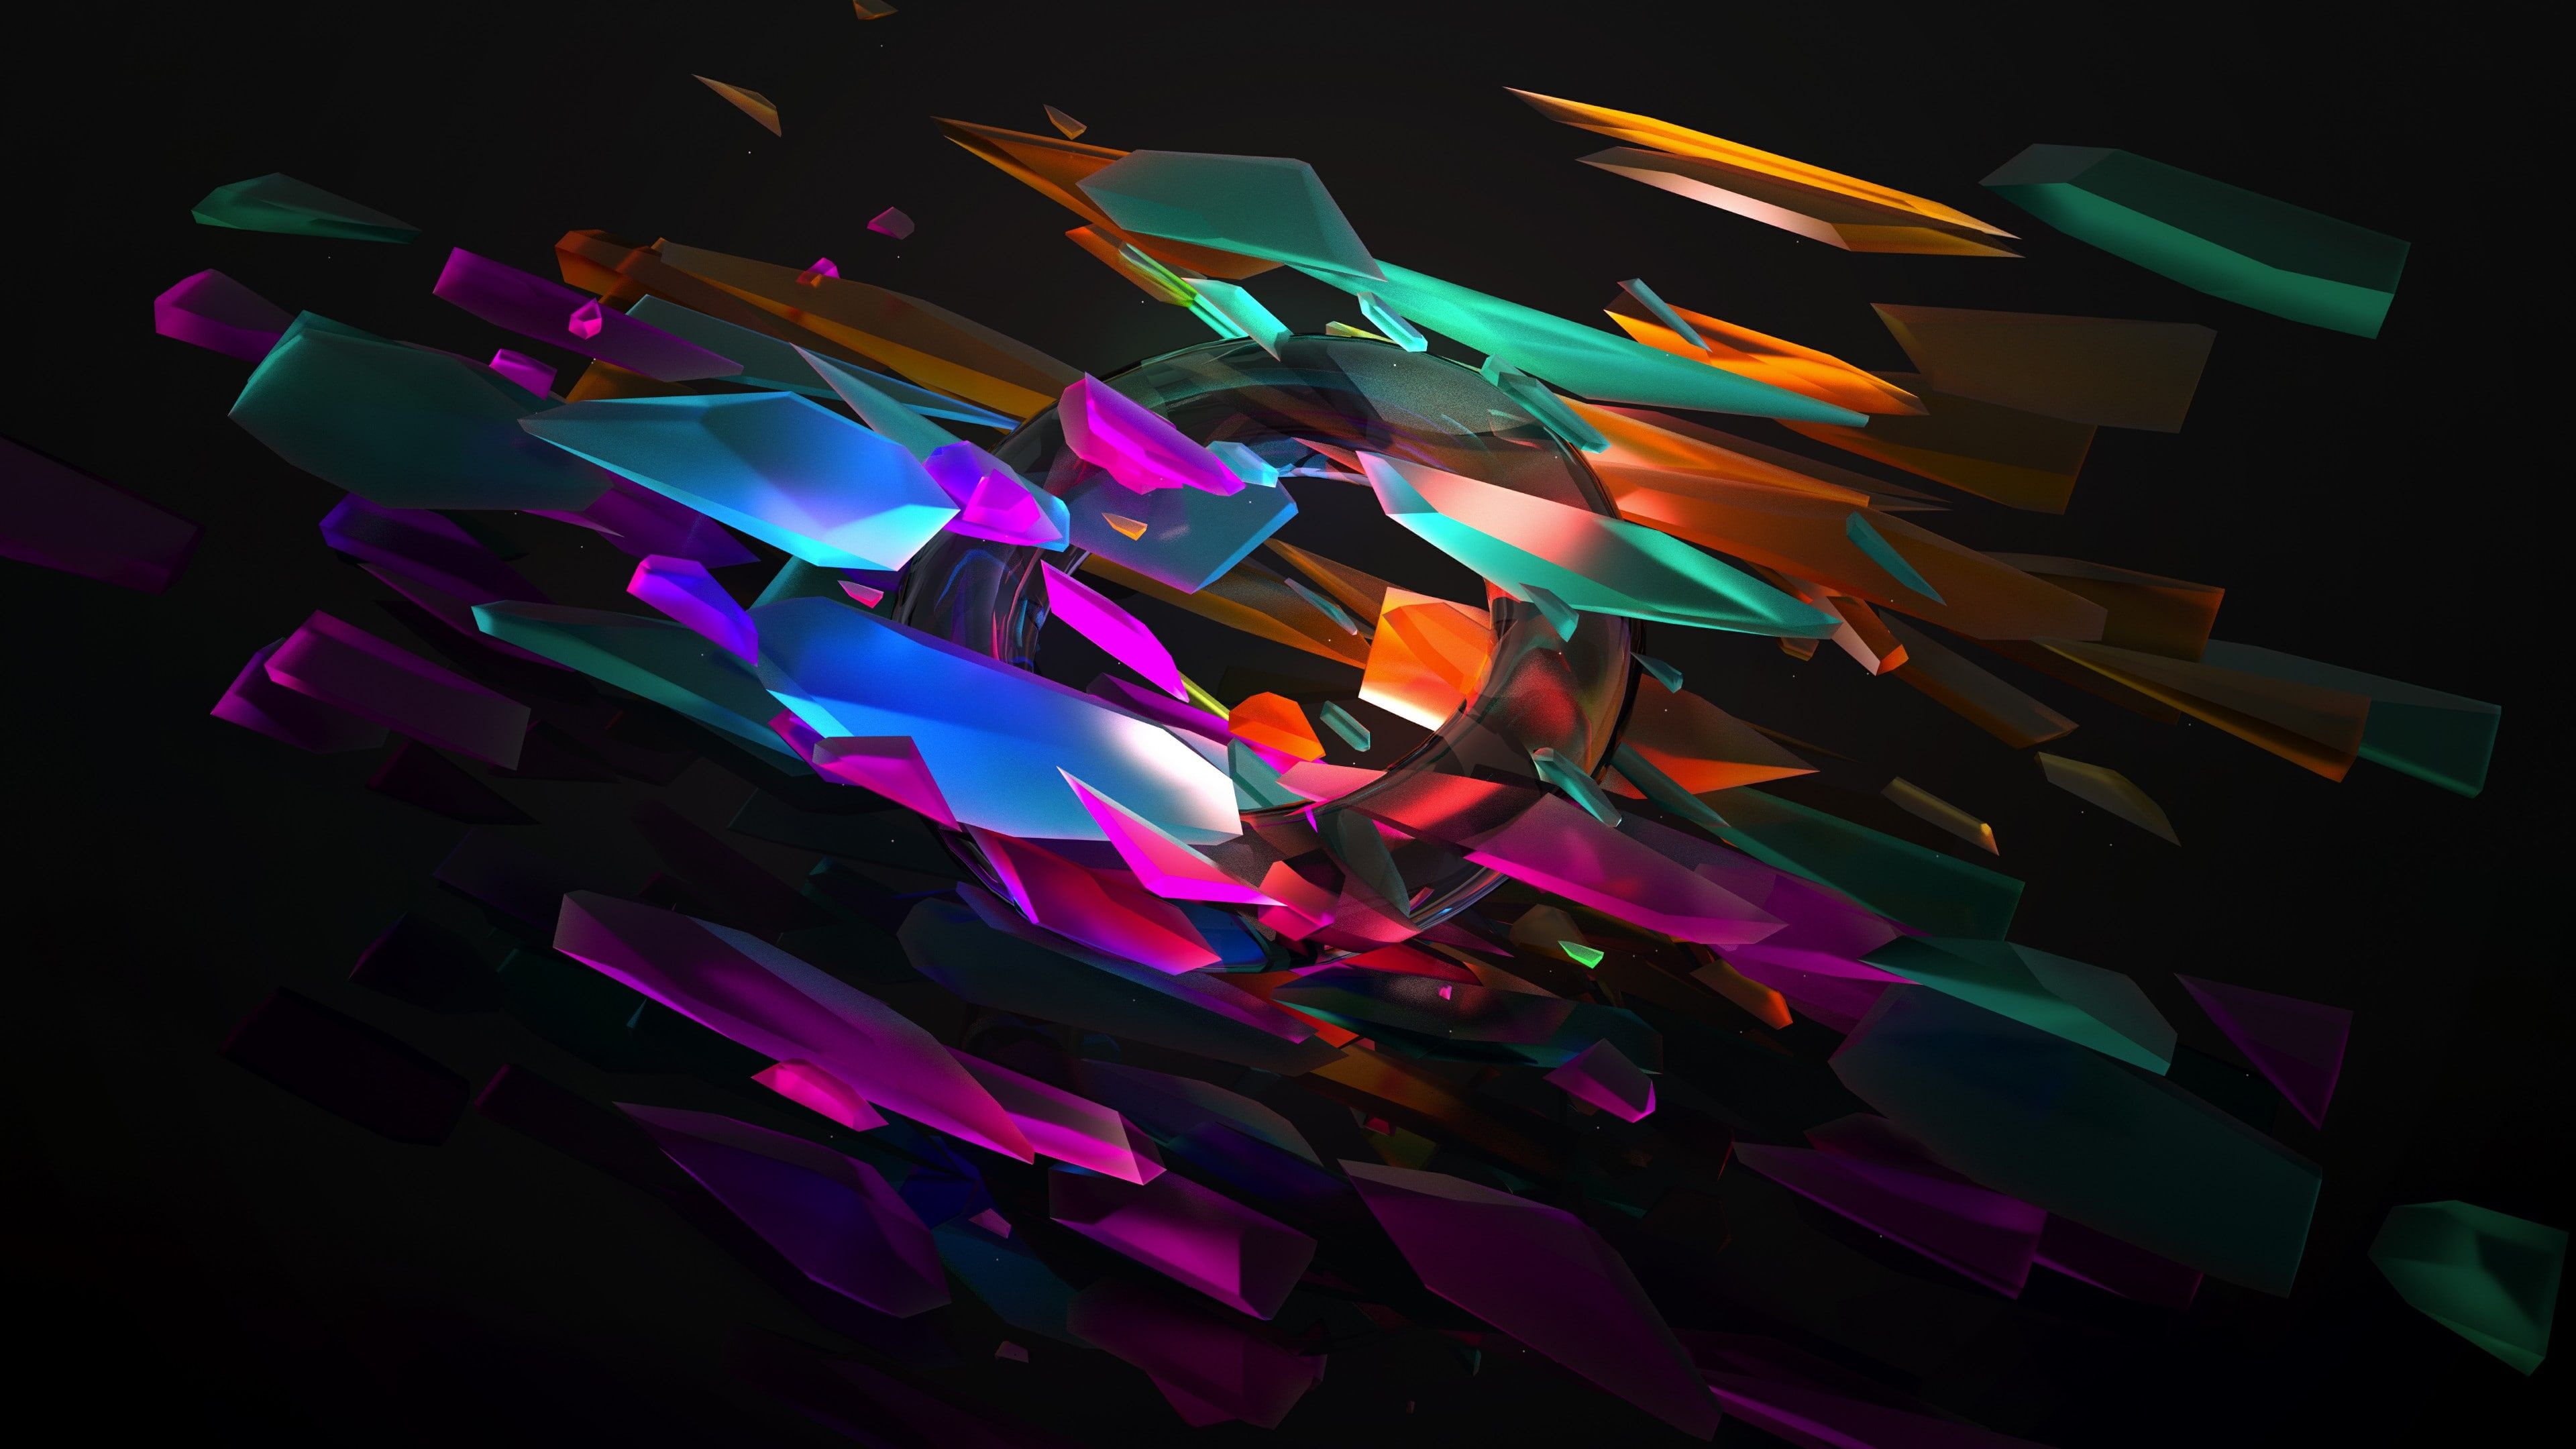 Graphic: Multicolored pieces in space, Abstract colorful shapes, Digital design. 3840x2160 4K Background.